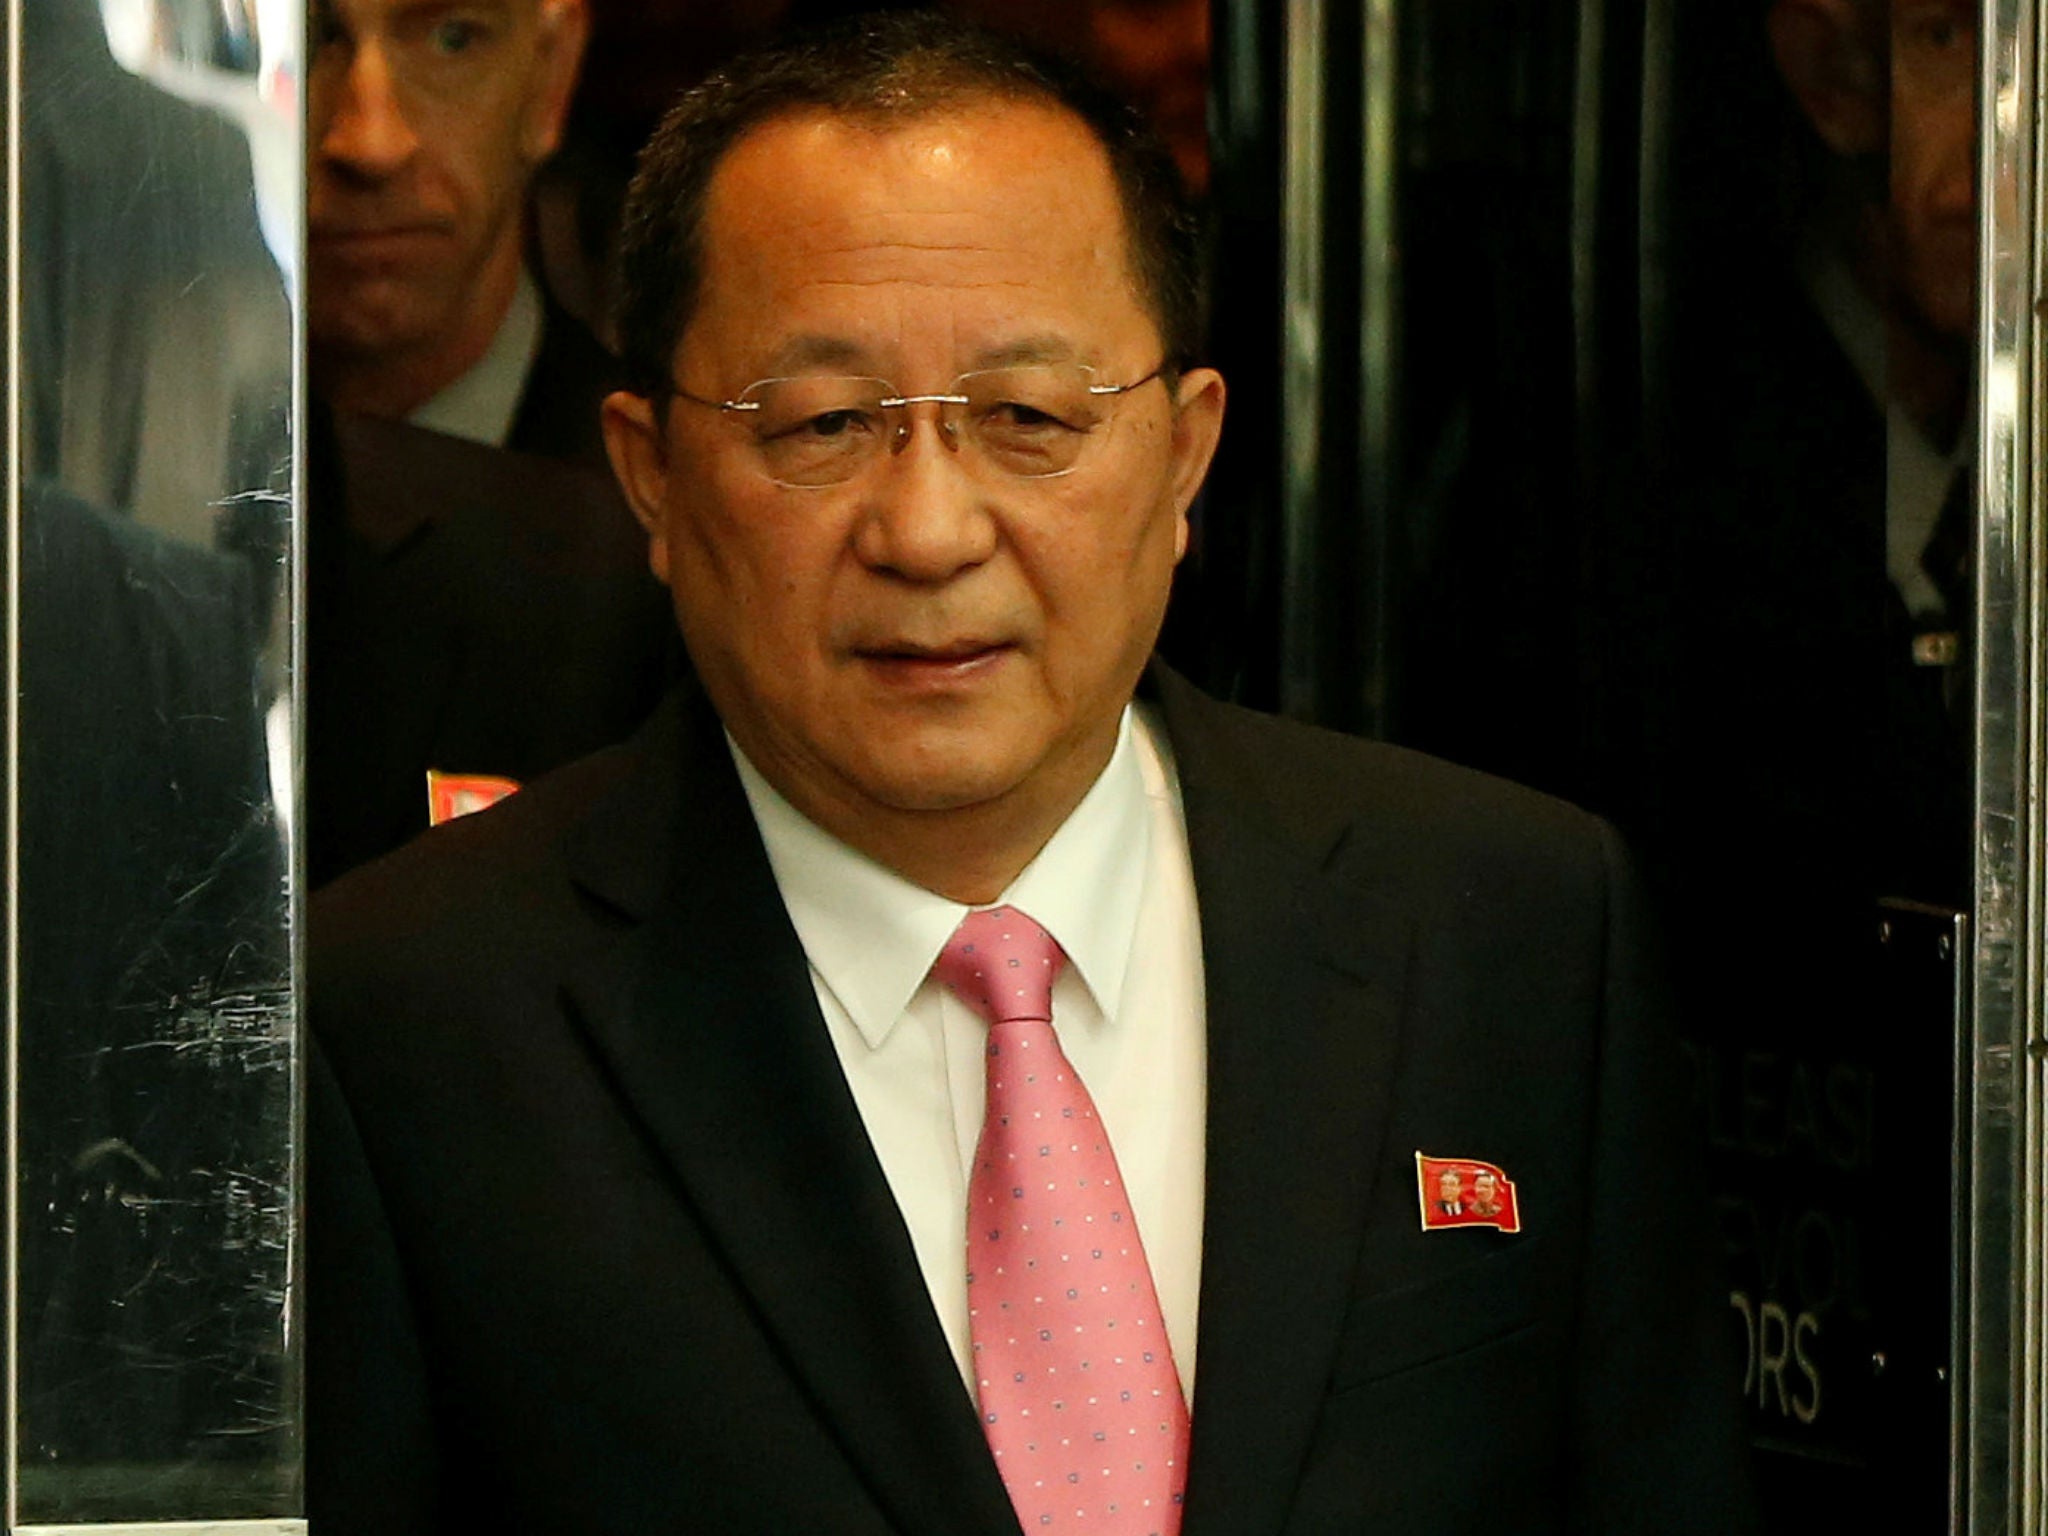 North Korean Foreign Minister Ri Yong-ho was in Sweden meeting with officials